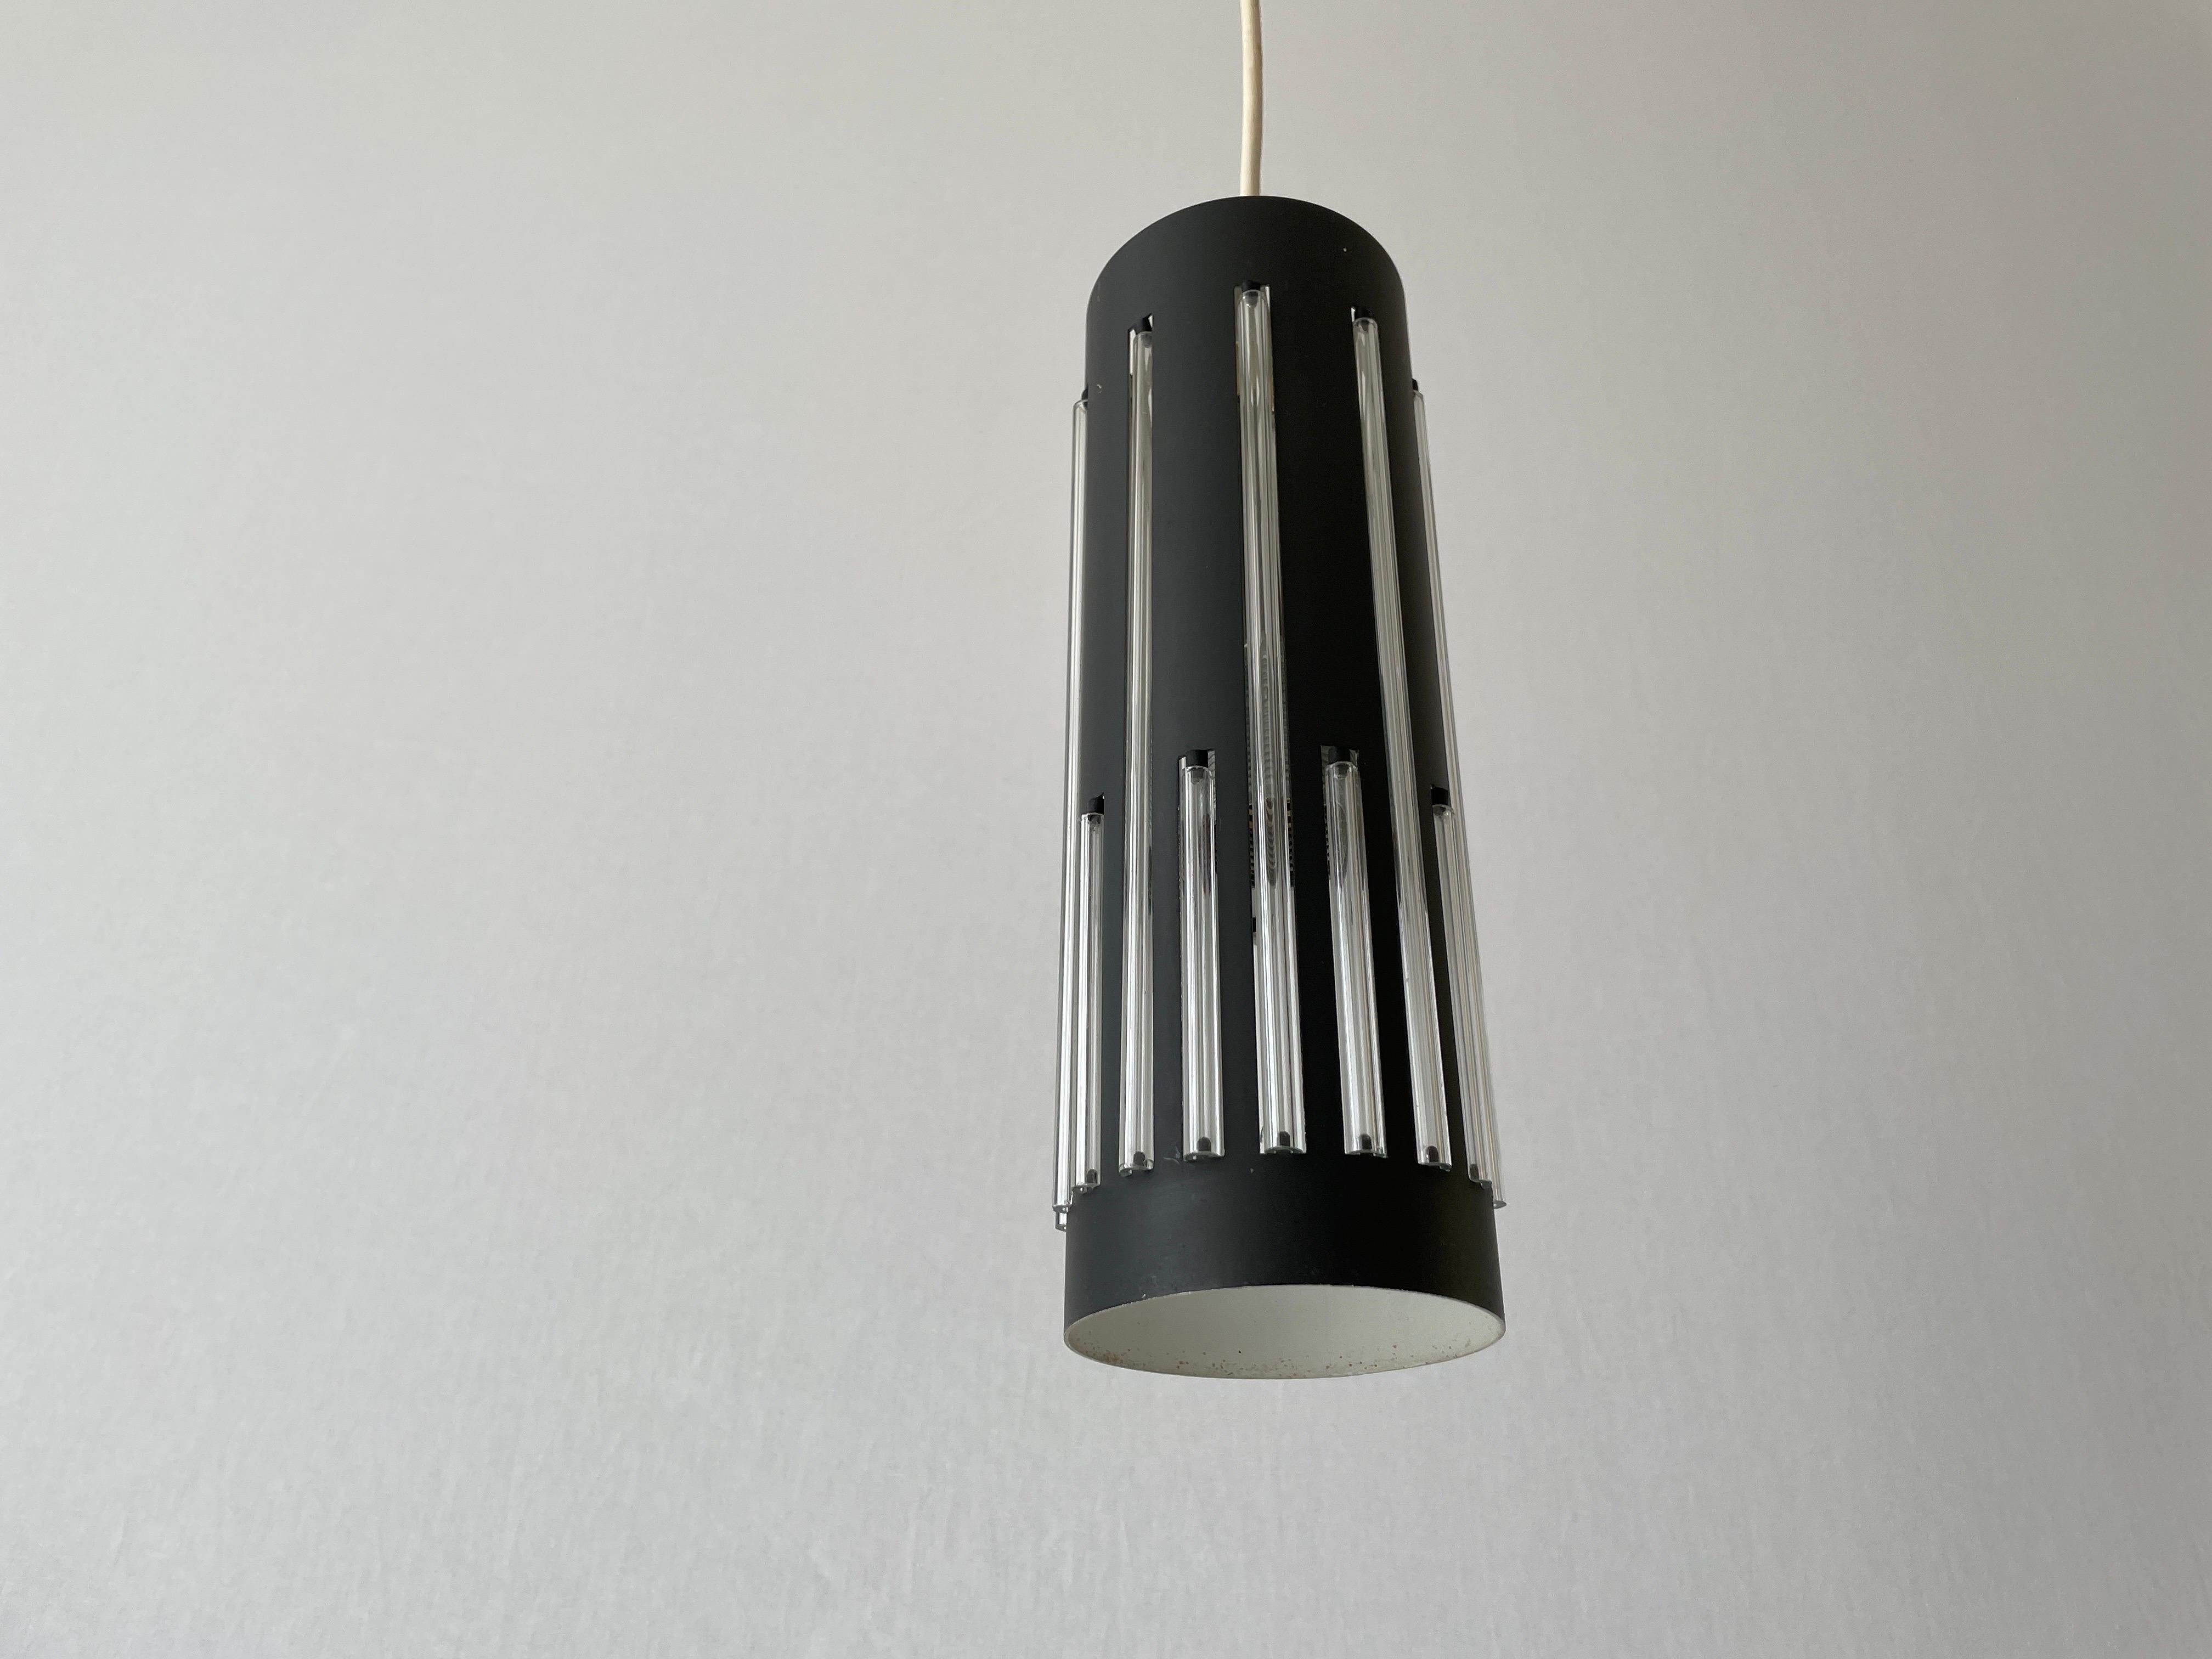 Modernist Cylinder Design Glass & Black Metal Pendant Lamp, 1960s, Germany
Quantity : 3

Lamps are in very good vintage condition.
Wear consistent with age and use

These lamp works with E27 standard light bulb. 
Wired and suitable to use in all